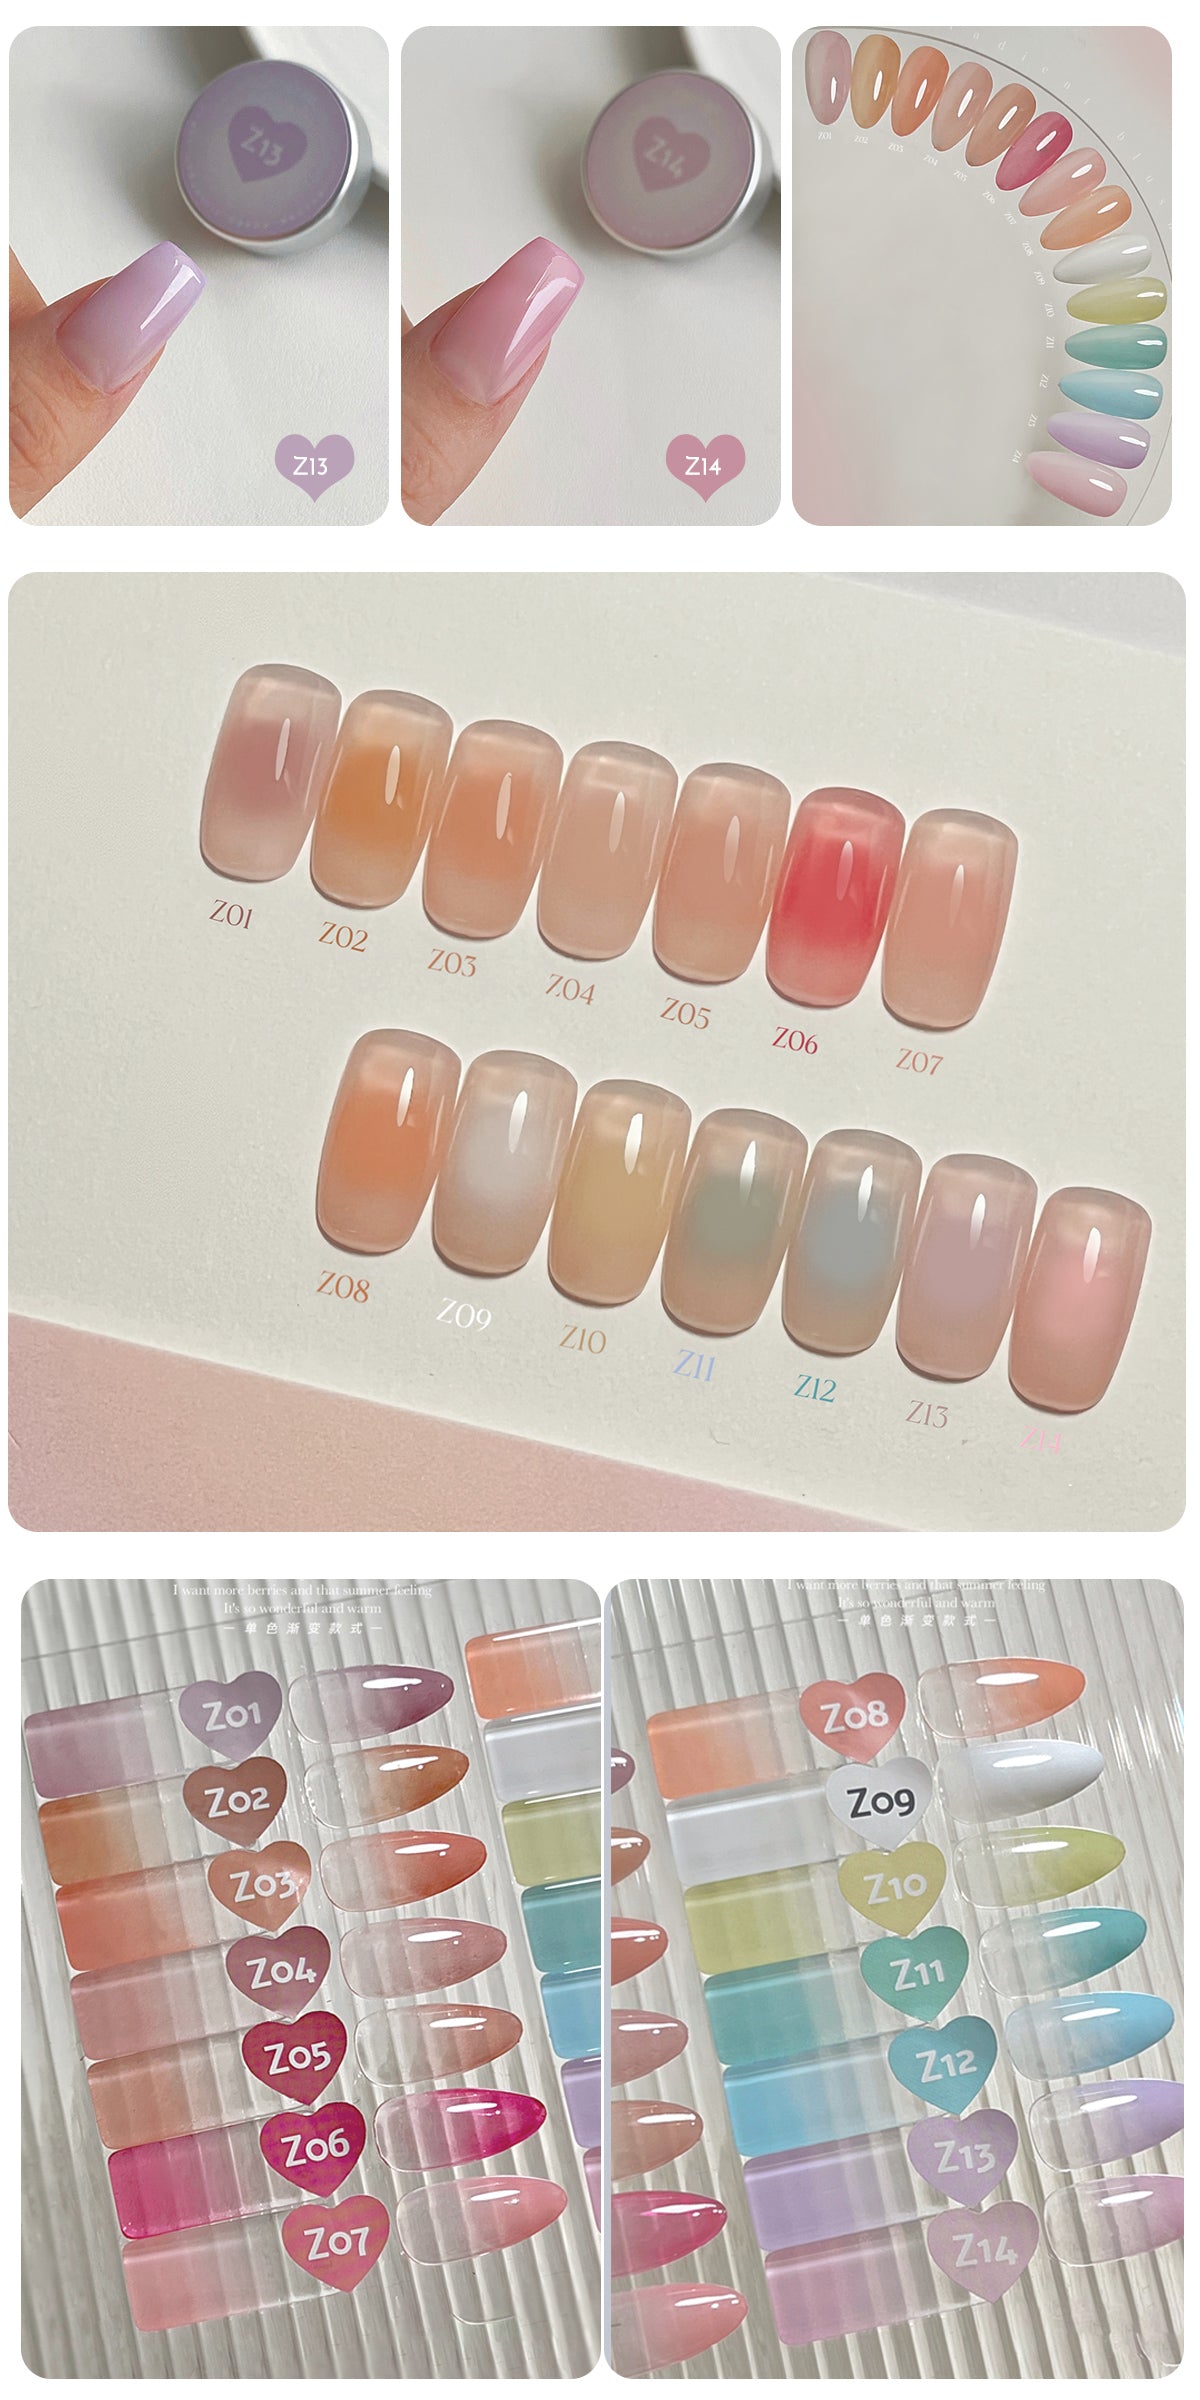 Xi Hui Gradient Blush Collection Colour Swatches